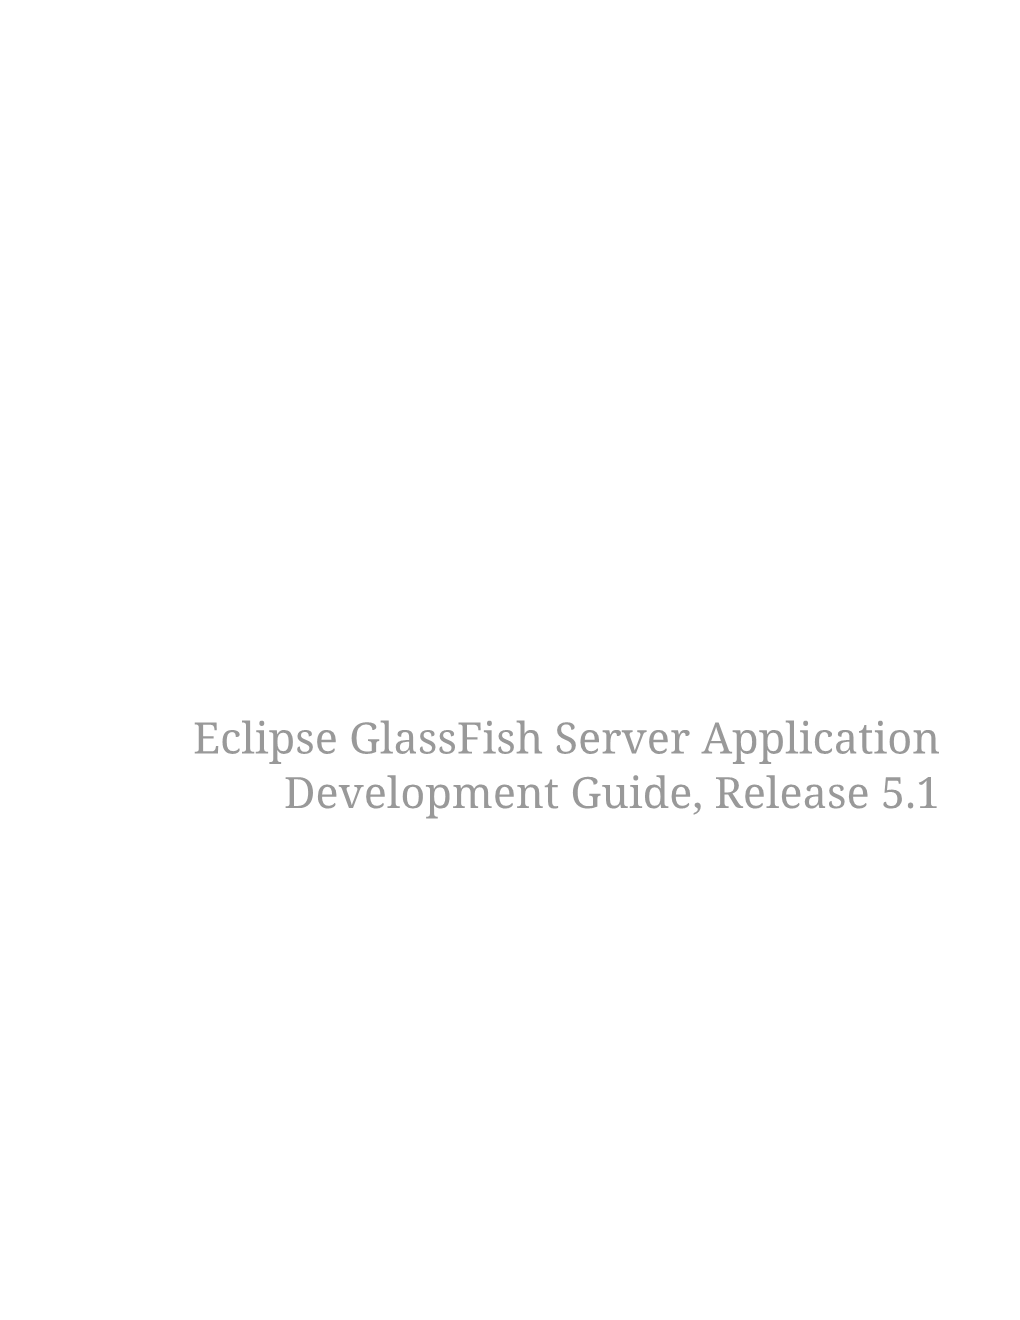 Eclipse Glassfish Server Application Development Guide, Release 5.1 Table of Contents